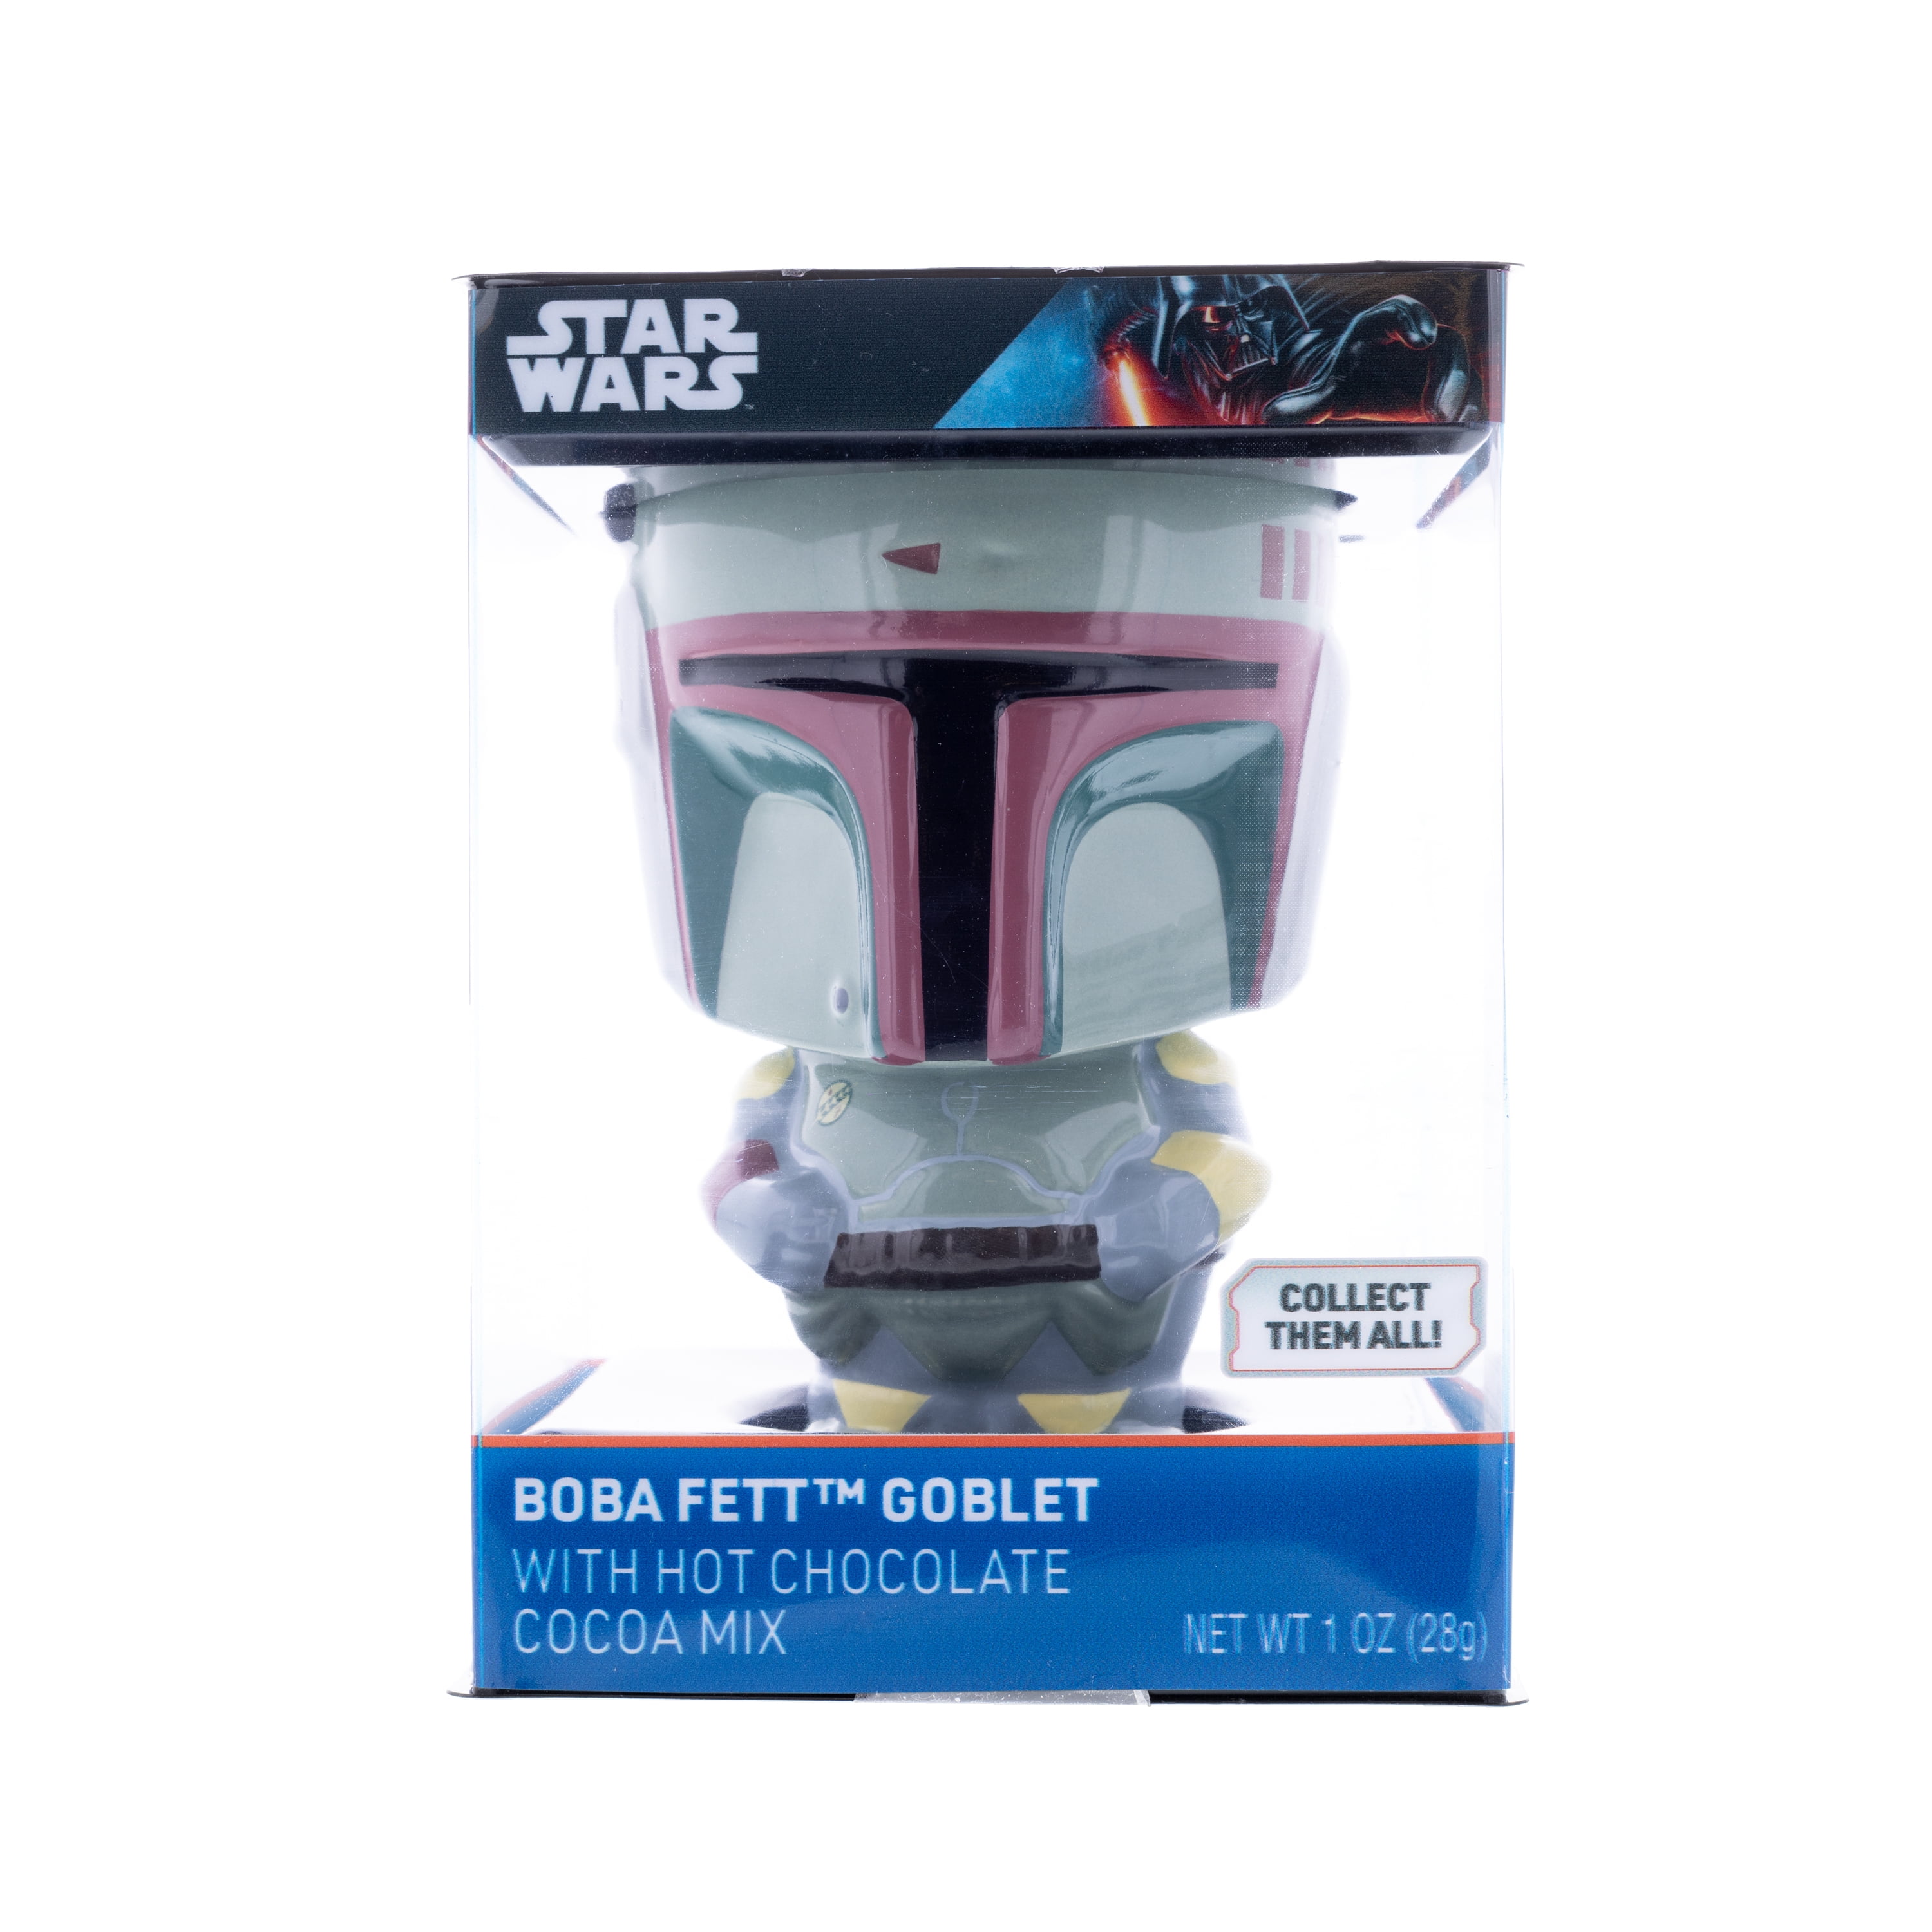 Star Wars Goblet with 1 OZ Hot Chocolate Hot Cocoa Mix - Boba Fett